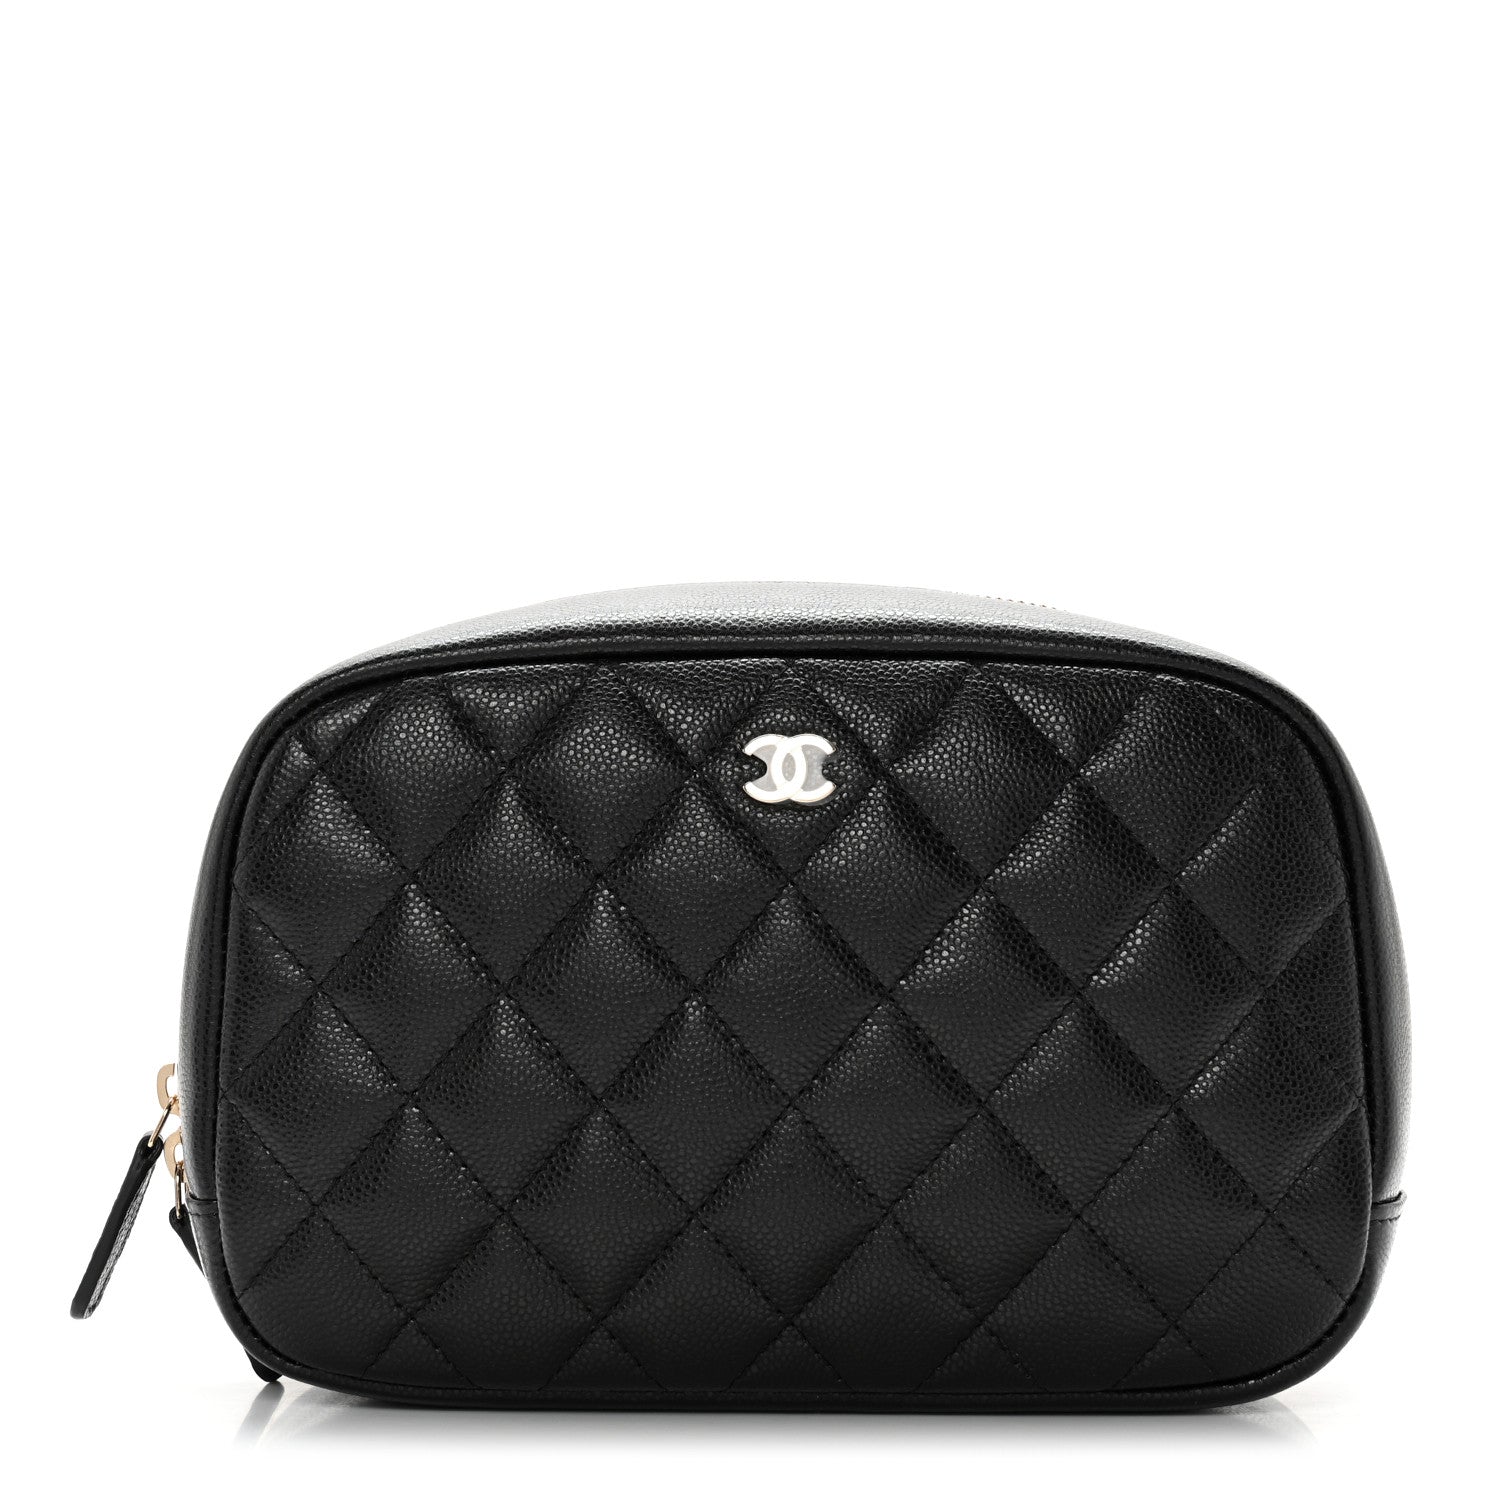 chanel classic card case holder